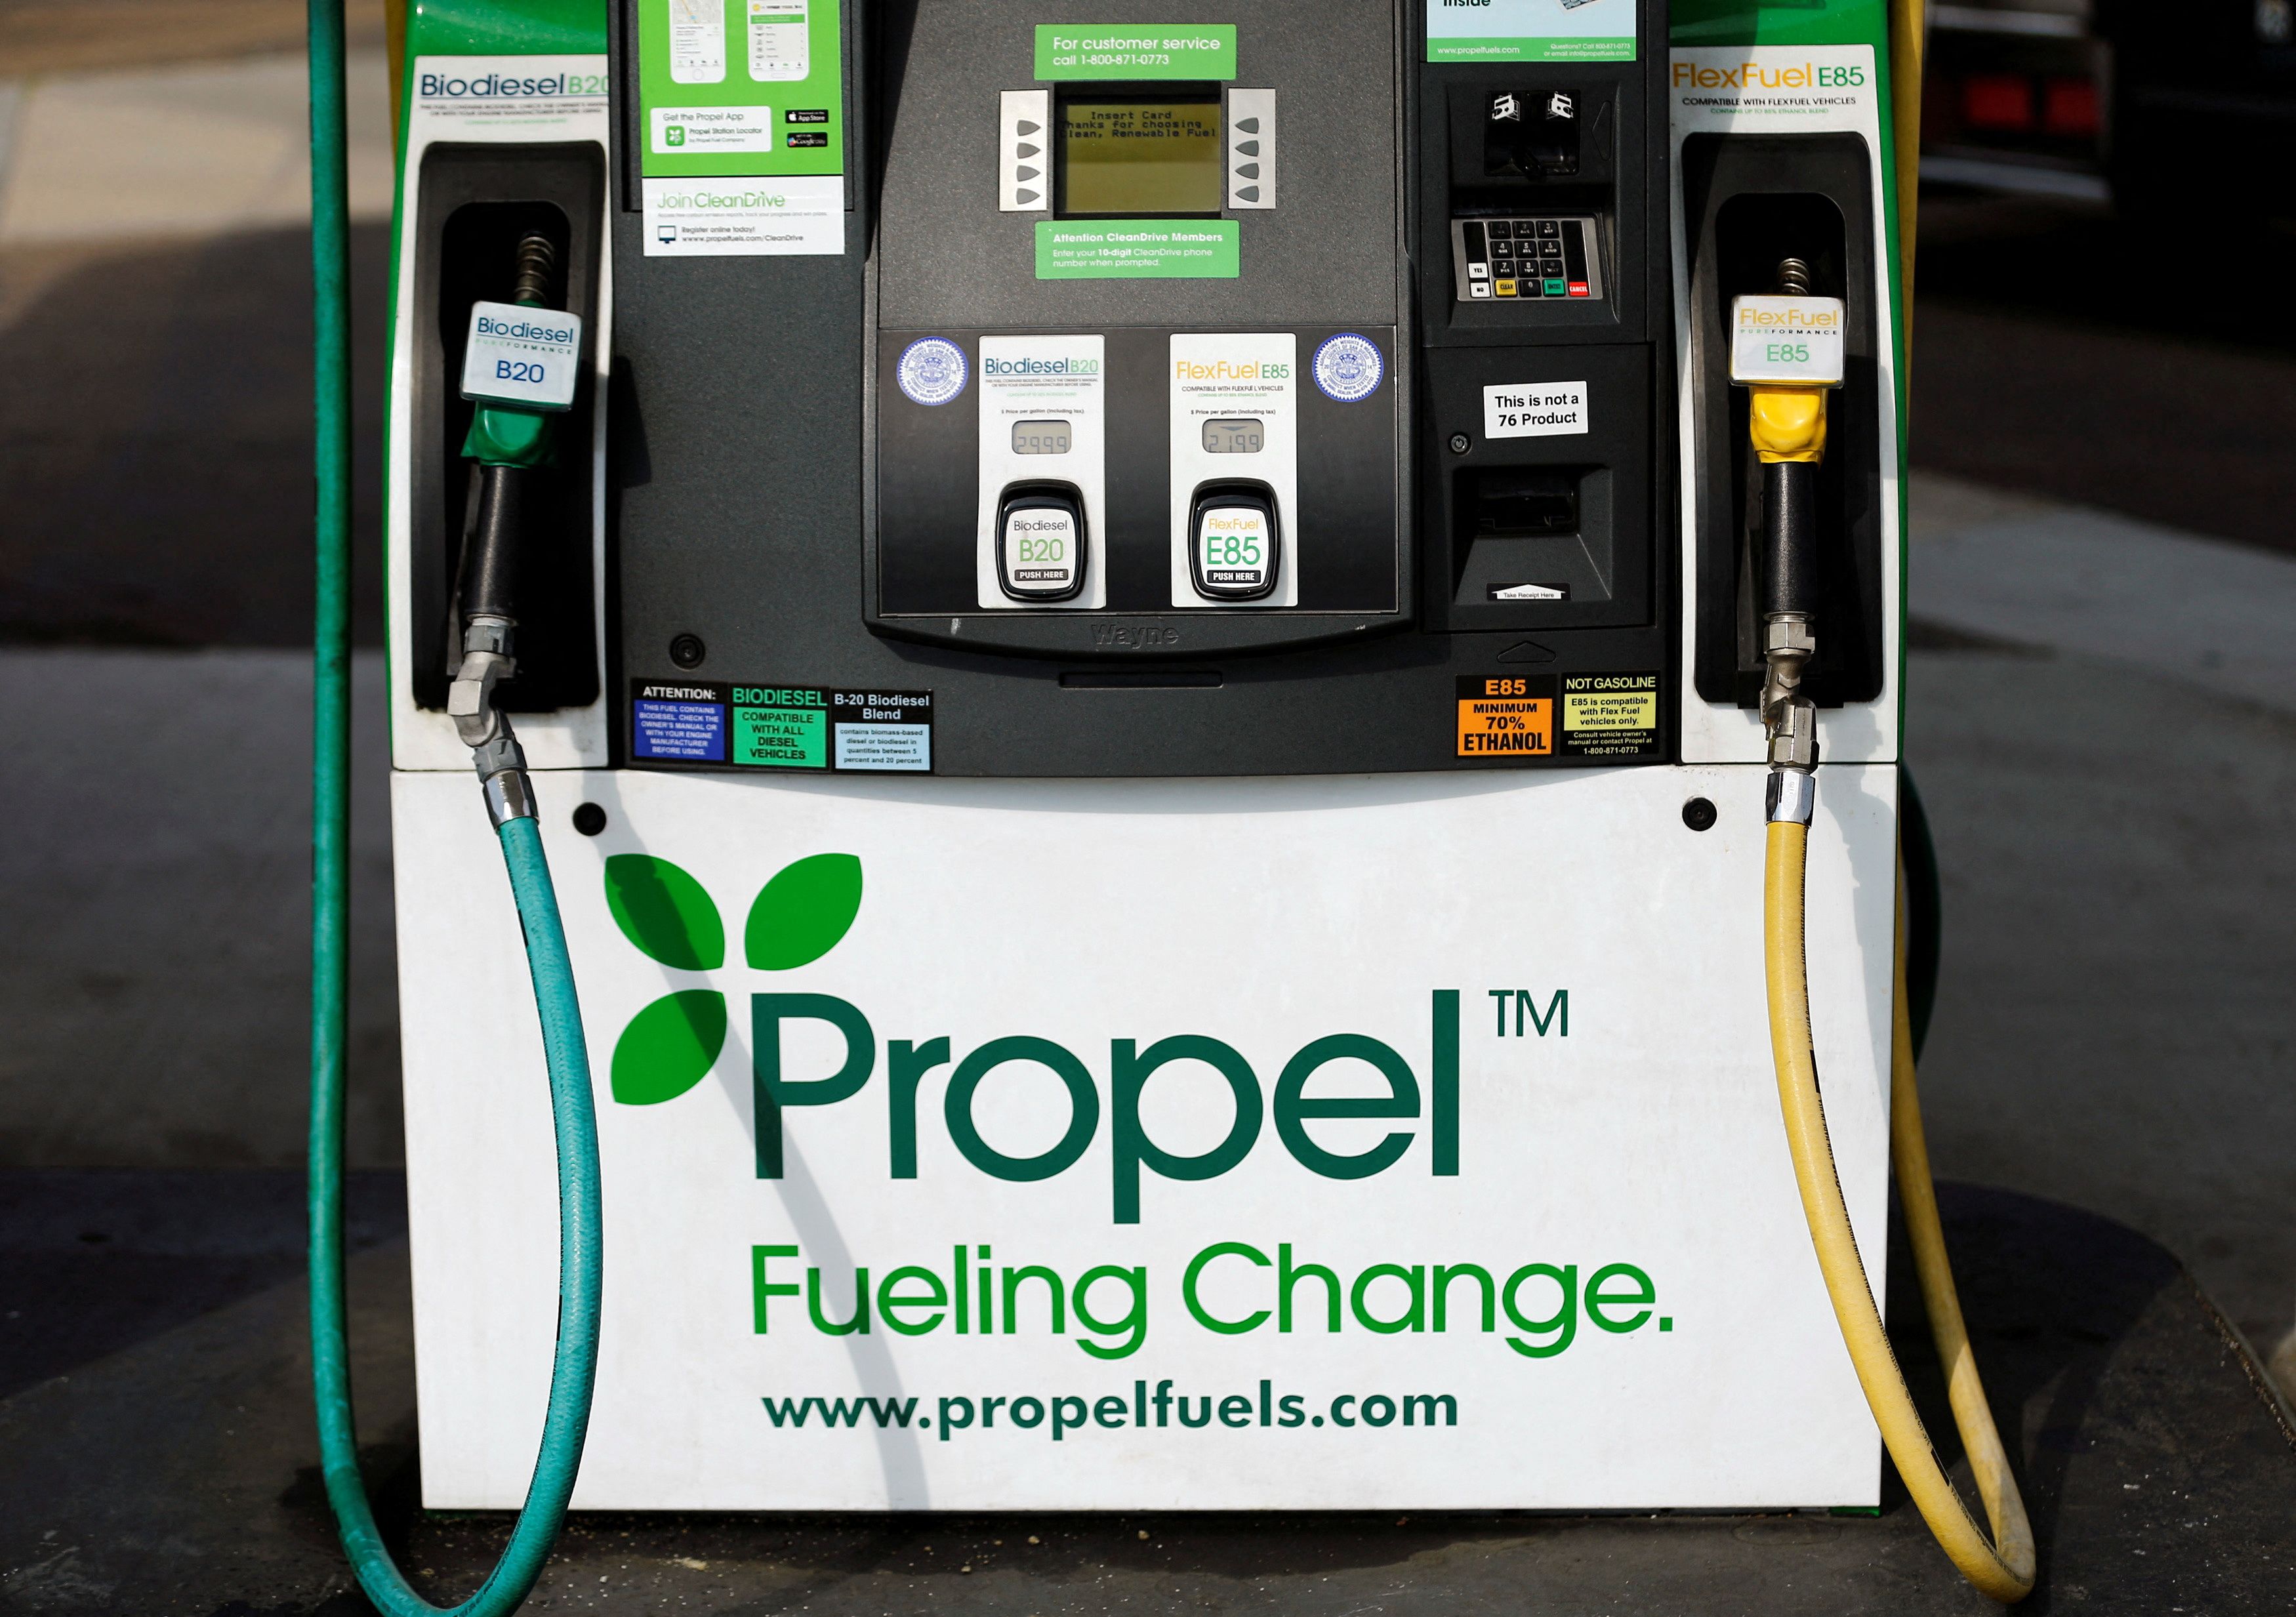 Pump at an alternative fueling station that provides fuel other than gasoline is shown in San Diego, California